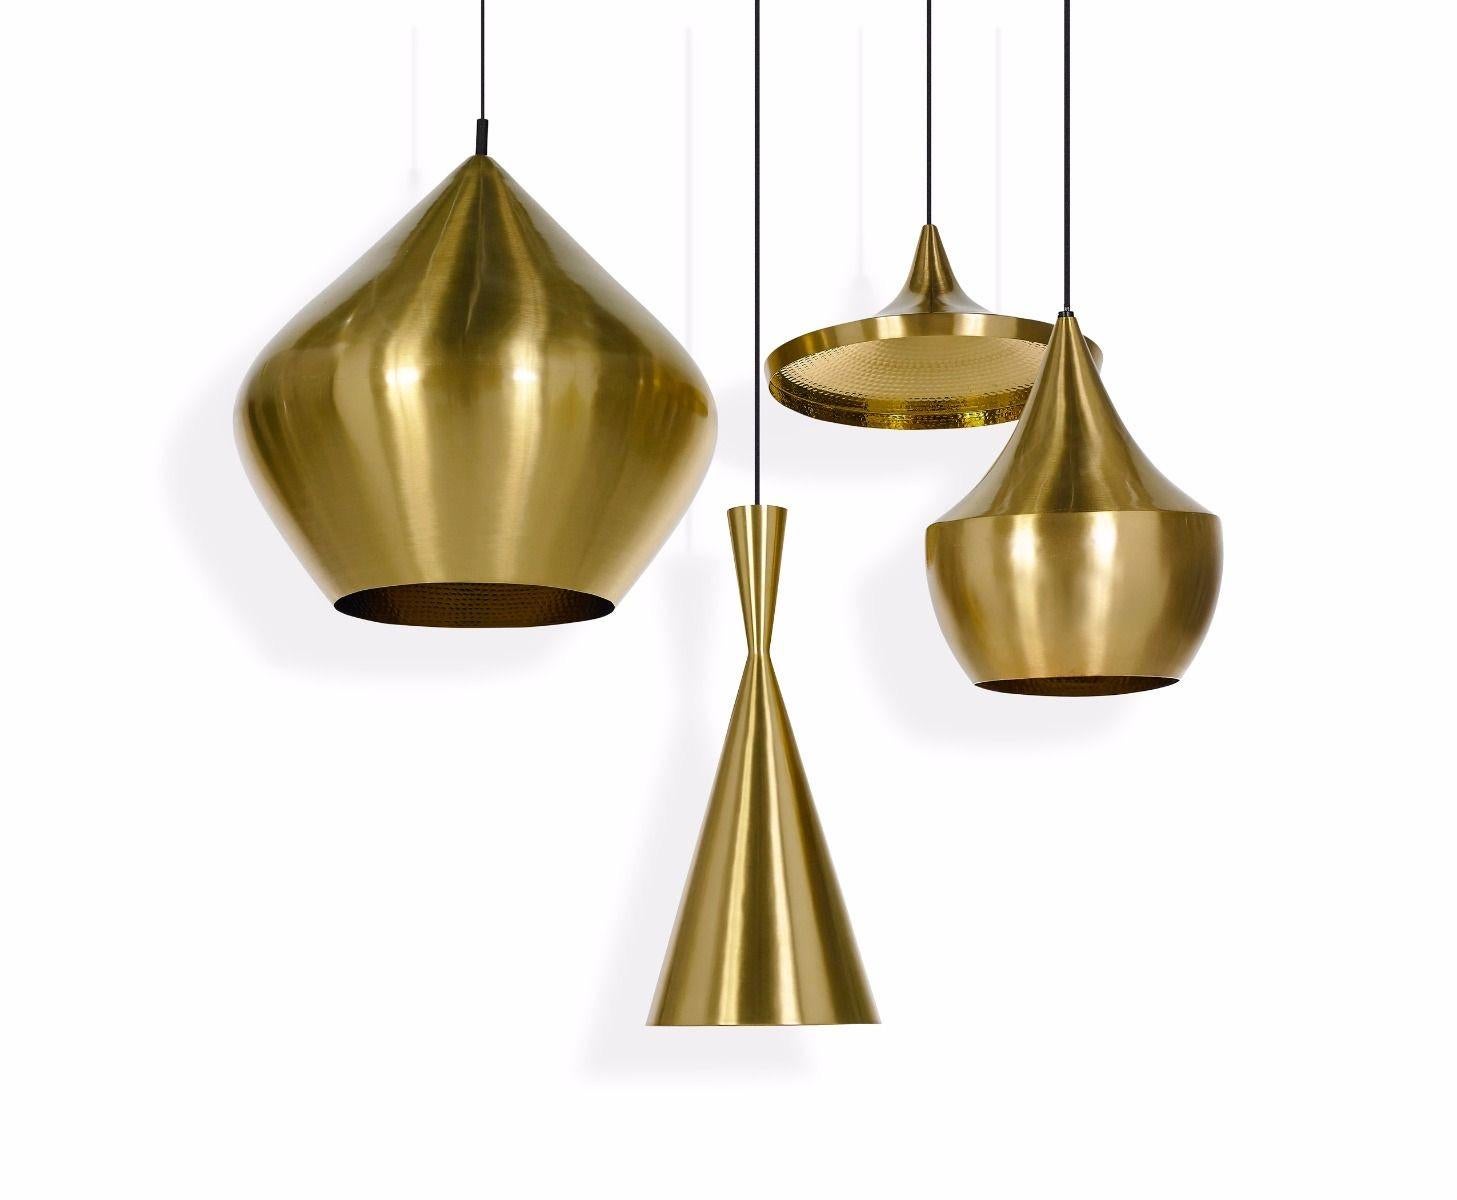 Tom Dixon burnished brass beat stout pendant light fixture, modern lighting, UK. Iconic contemporary design. New in box, never installed. MSRP 1270 USD.

Without a contrasting exterior finish, beat is left in its purest form, a warm golden brass